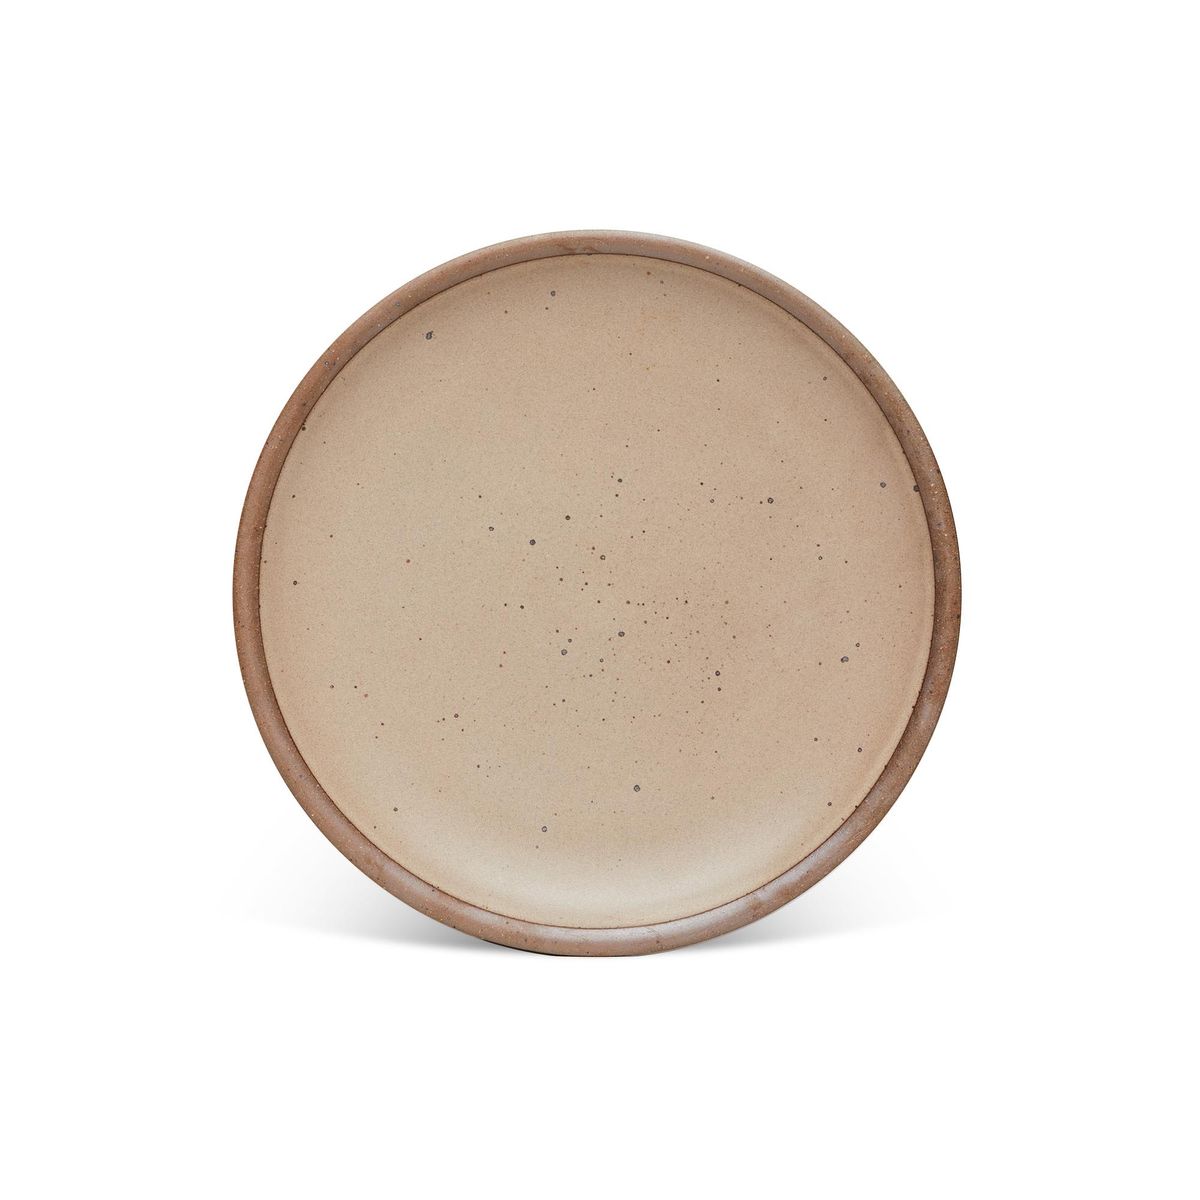 A dinner sized ceramic plate in a warm pale brown color featuring iron speckles and an unglazed rim.